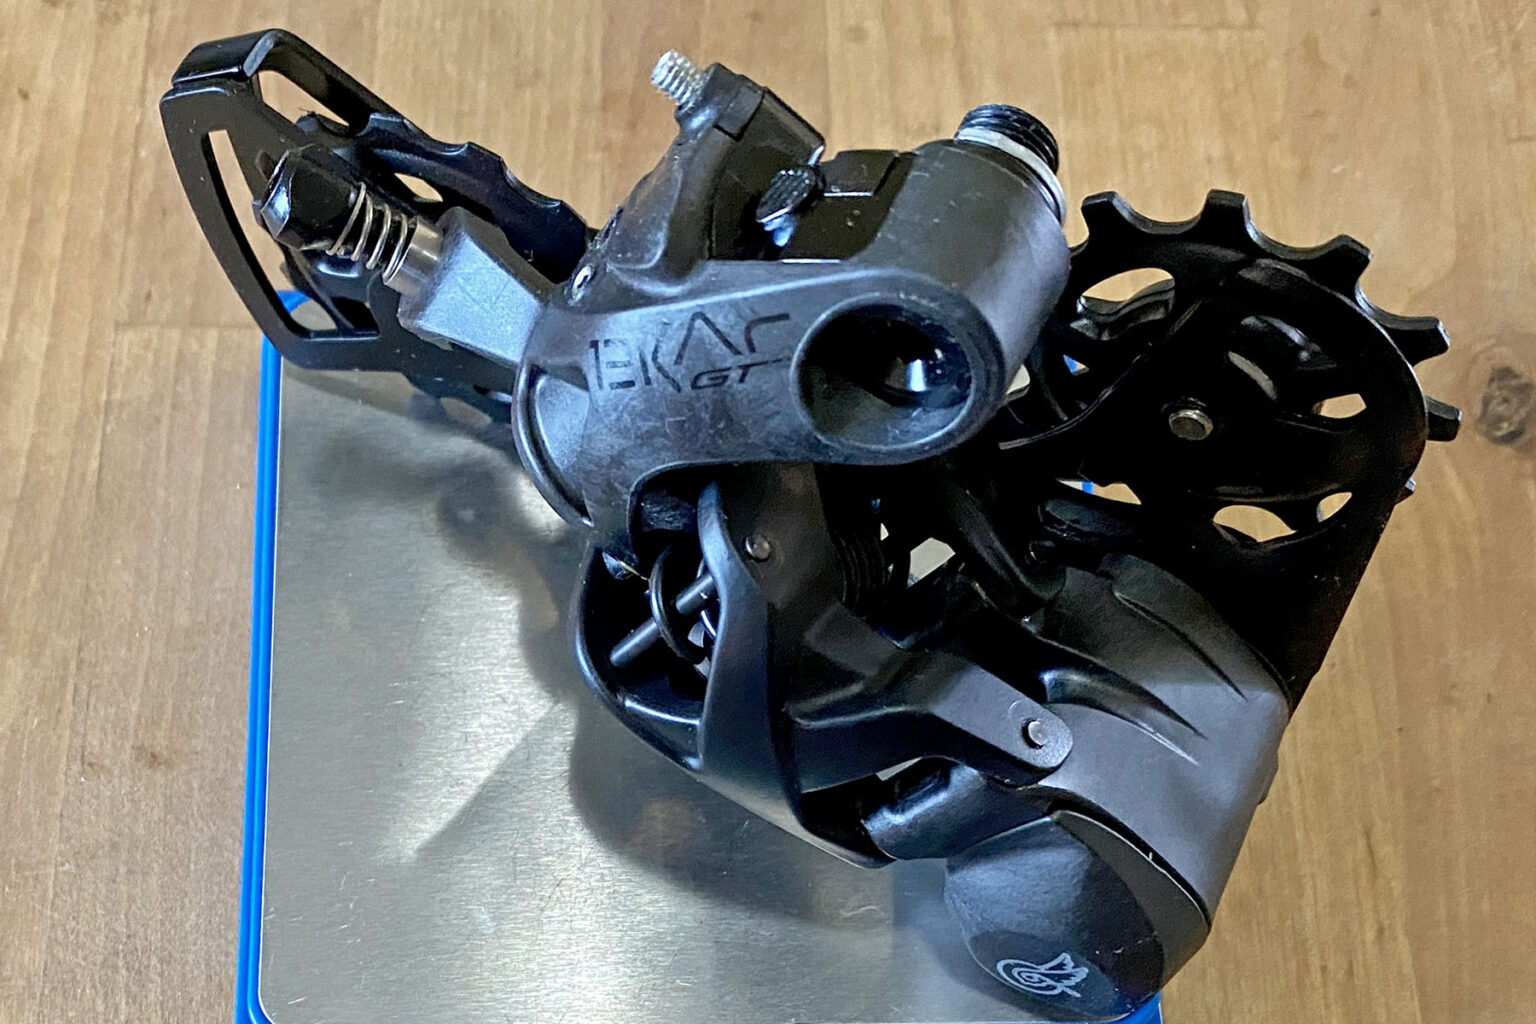 Campagnolo Ekar GT actual weights, affordable Campy gravel group, still carbon composite in the derailleur